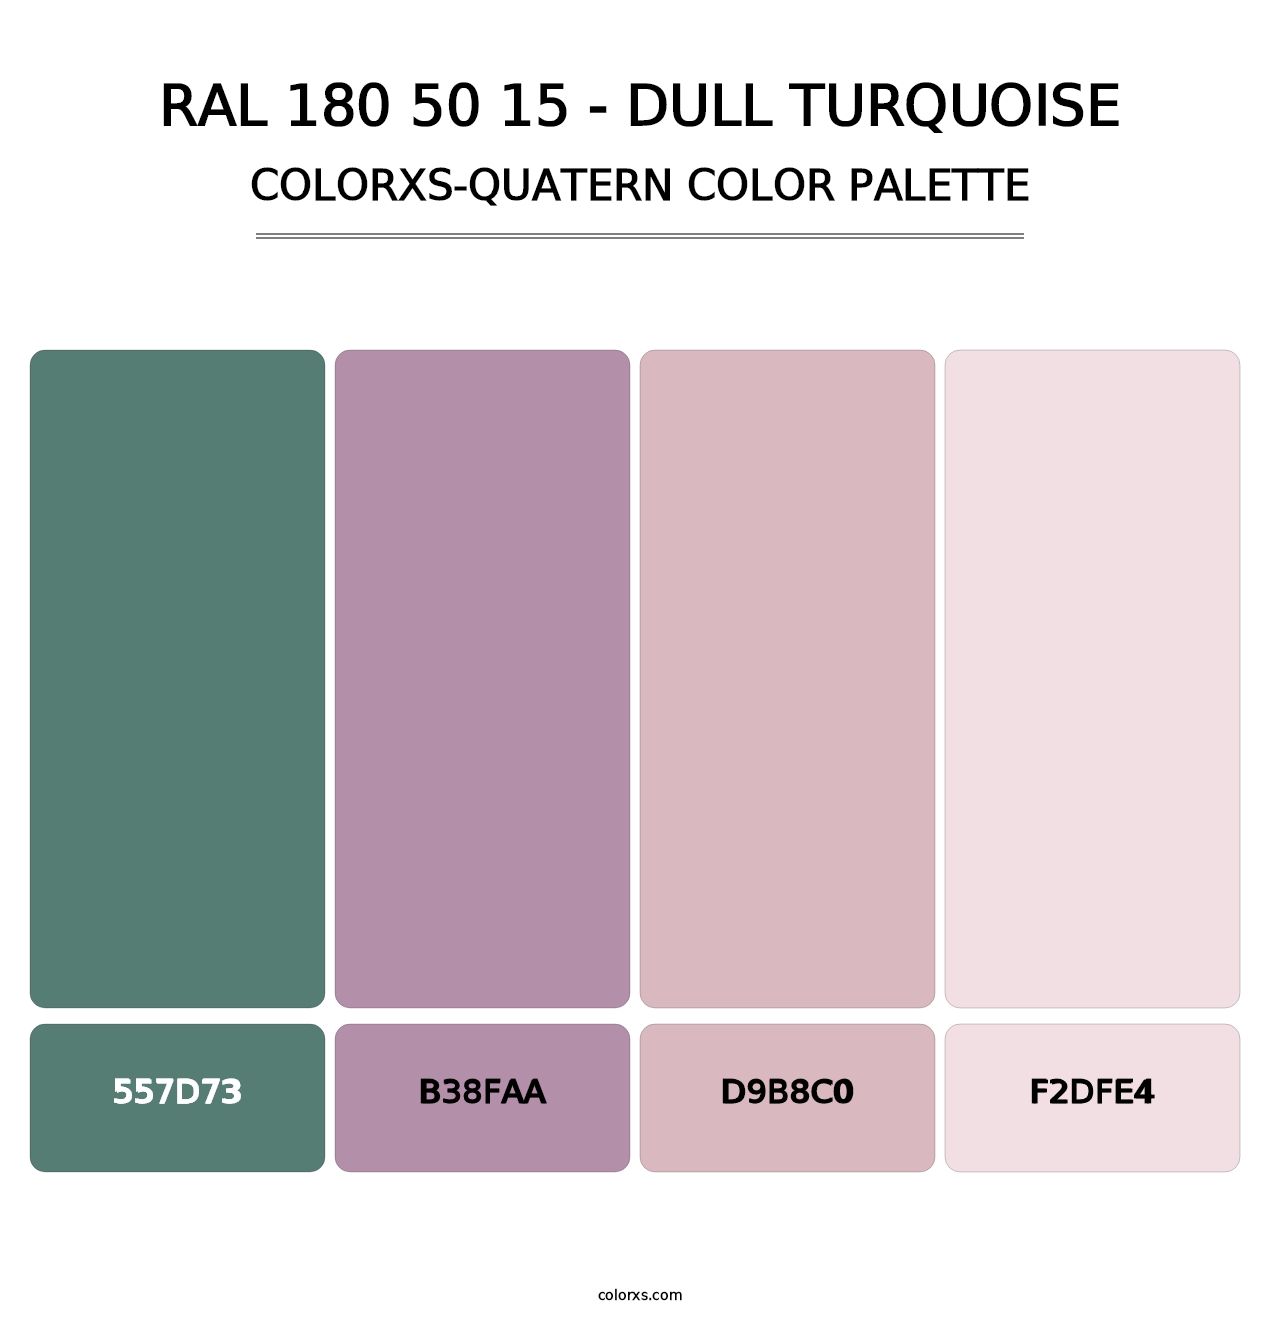 RAL 180 50 15 - Dull Turquoise - Colorxs Quatern Palette